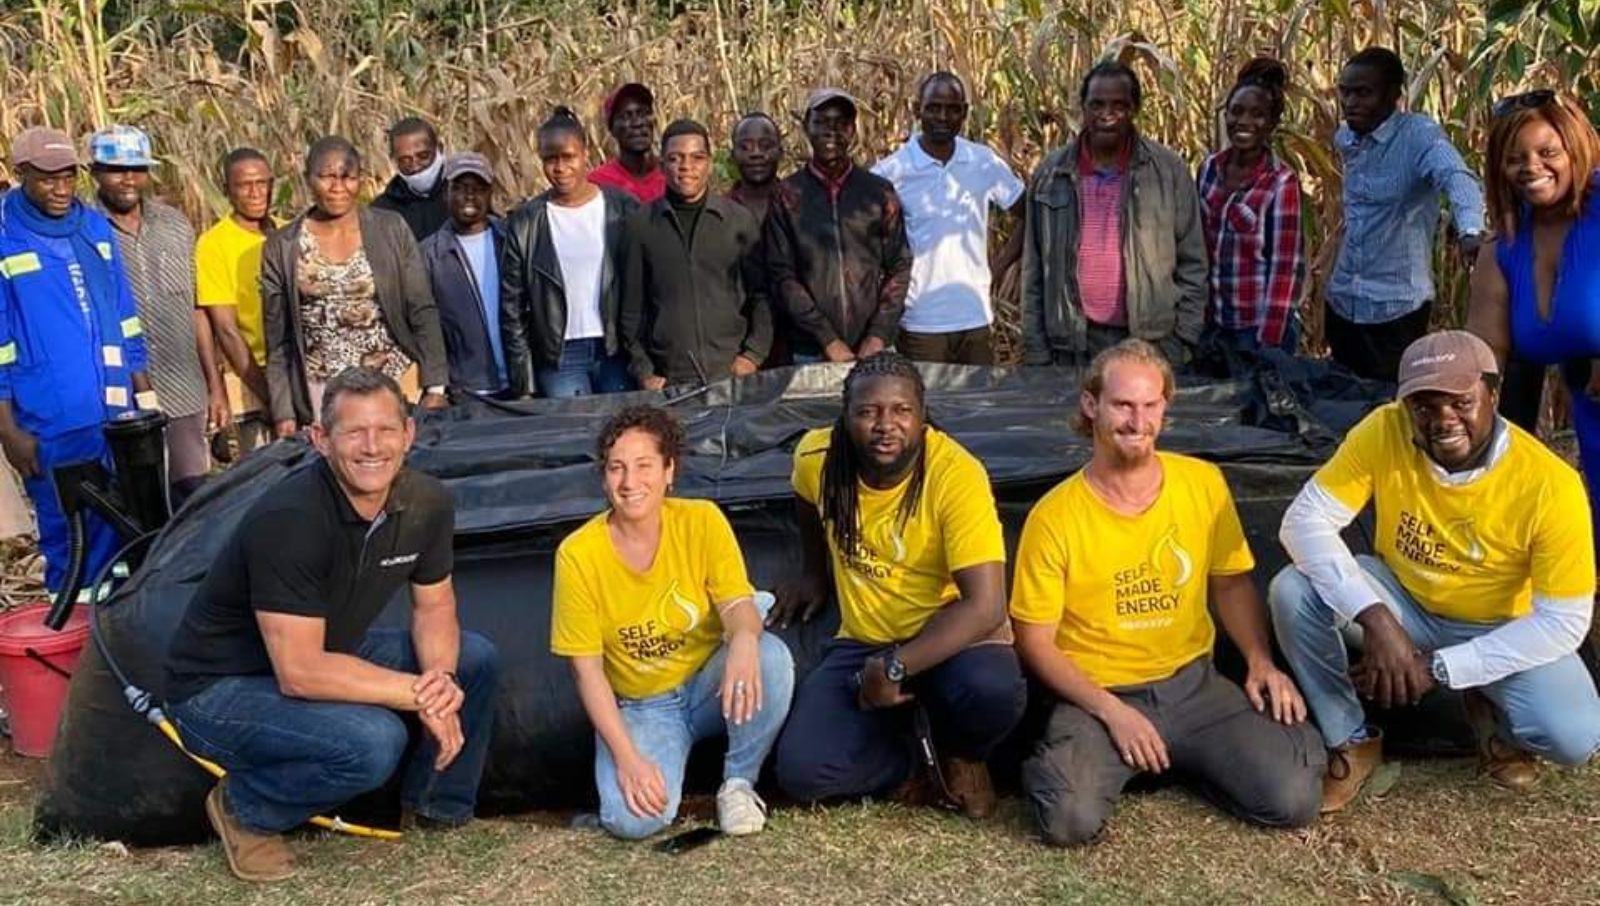 HomeBiogas team members and associates during a pilot to test out the company’s solution in a refugee camp in Africa. (Courtesy of HomeBiogas)